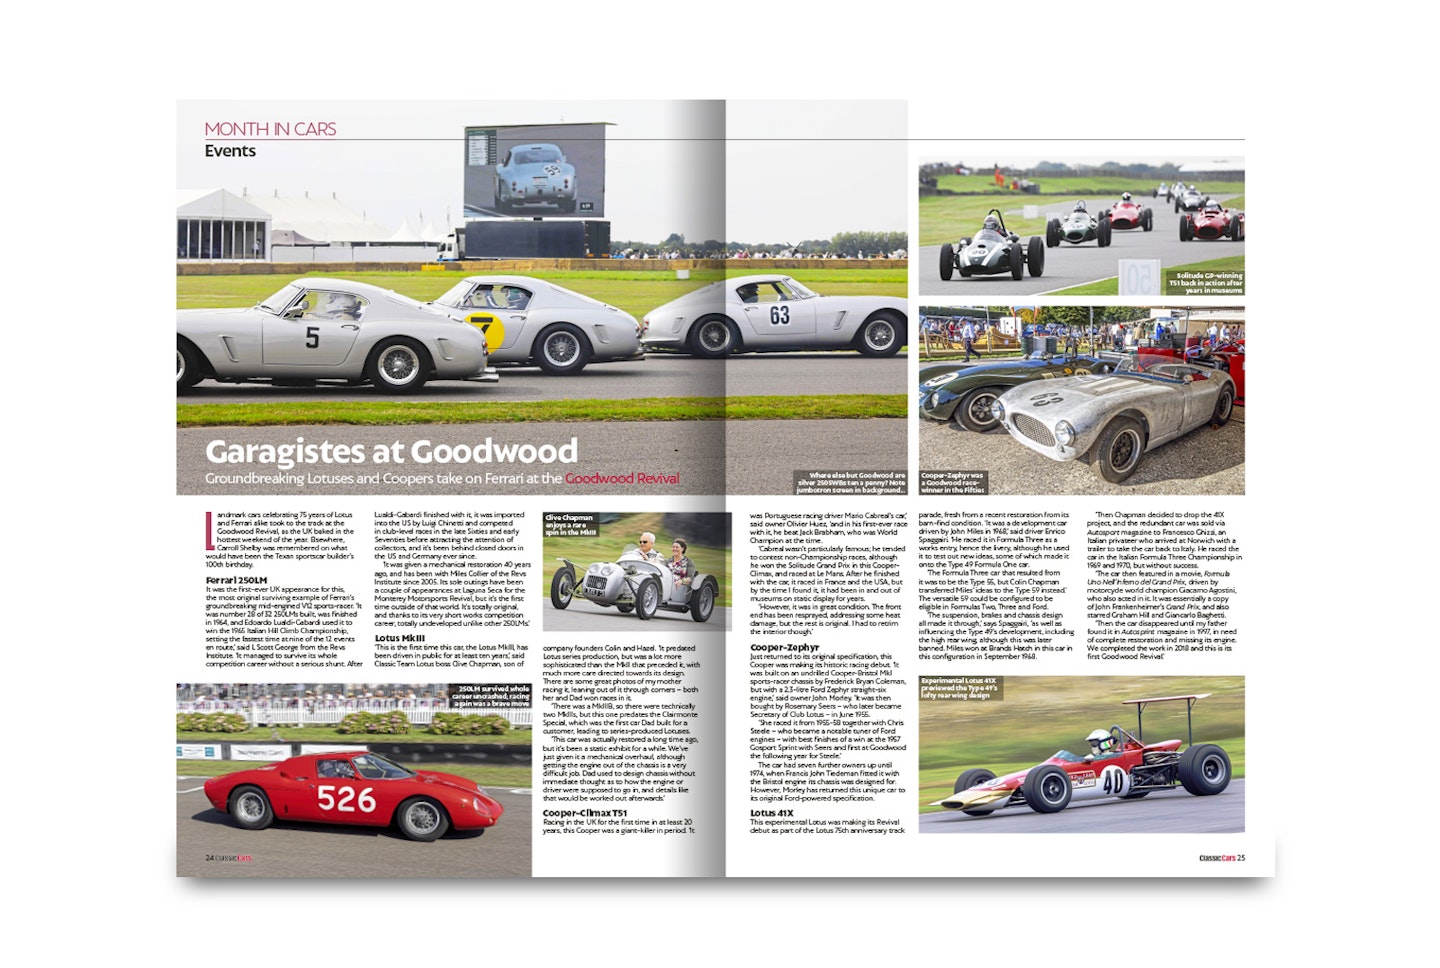 p24 Goodwood Revival Ferrari and Lotus celebrate 75th birthdays – as does Goodwood itself